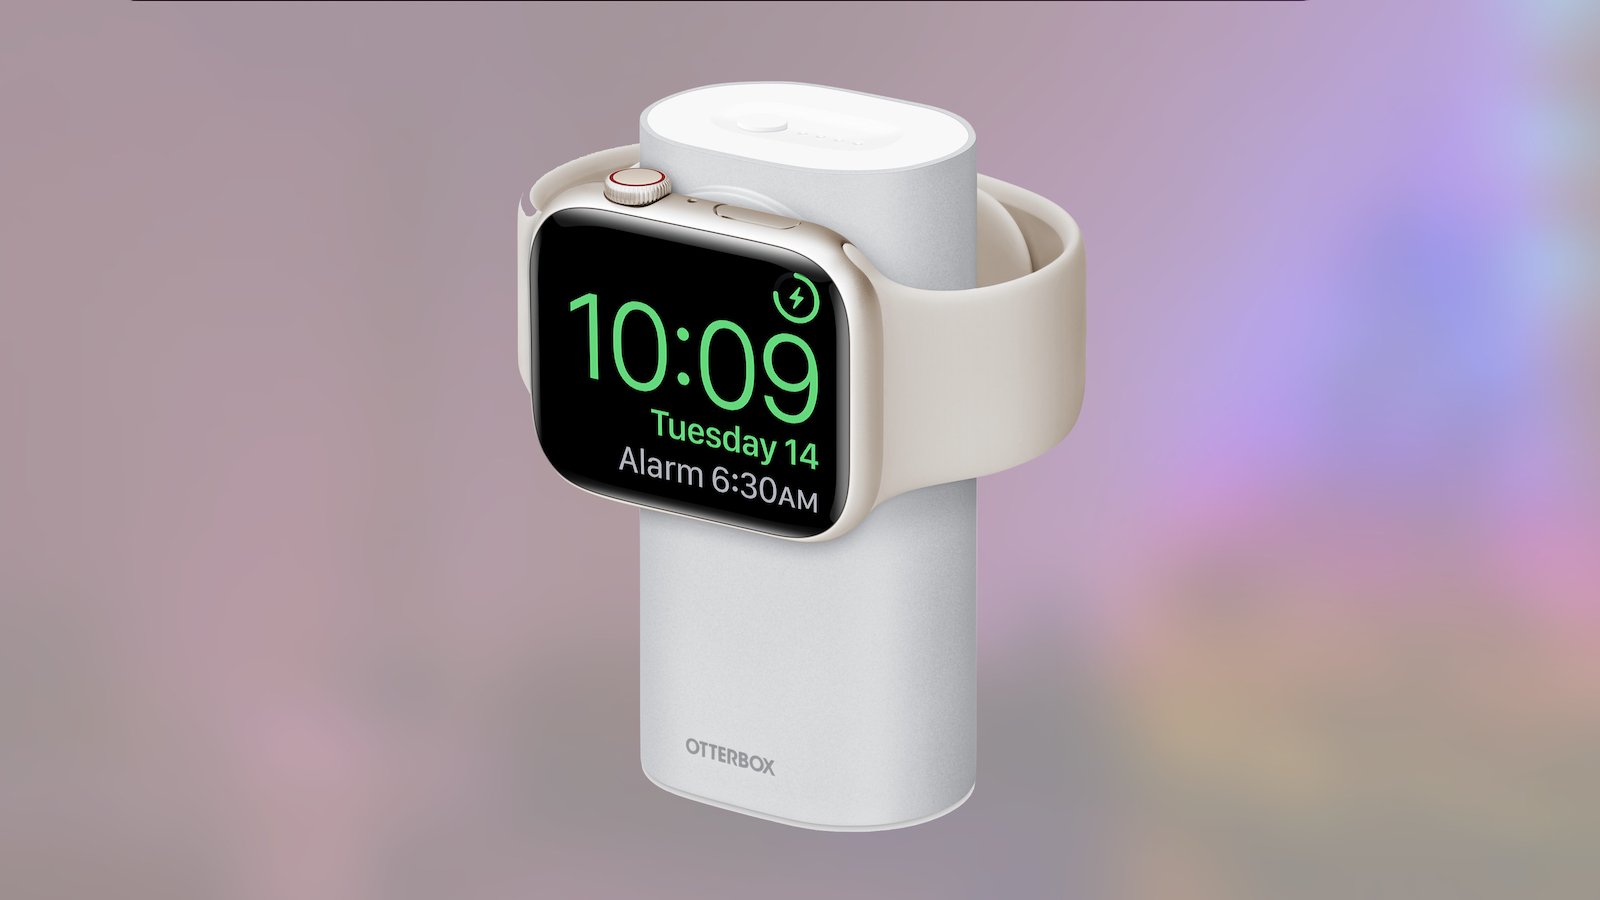 OtterBox 2-in-1 Power Bank with Apple Watch Charger sets up in an instant even on the go